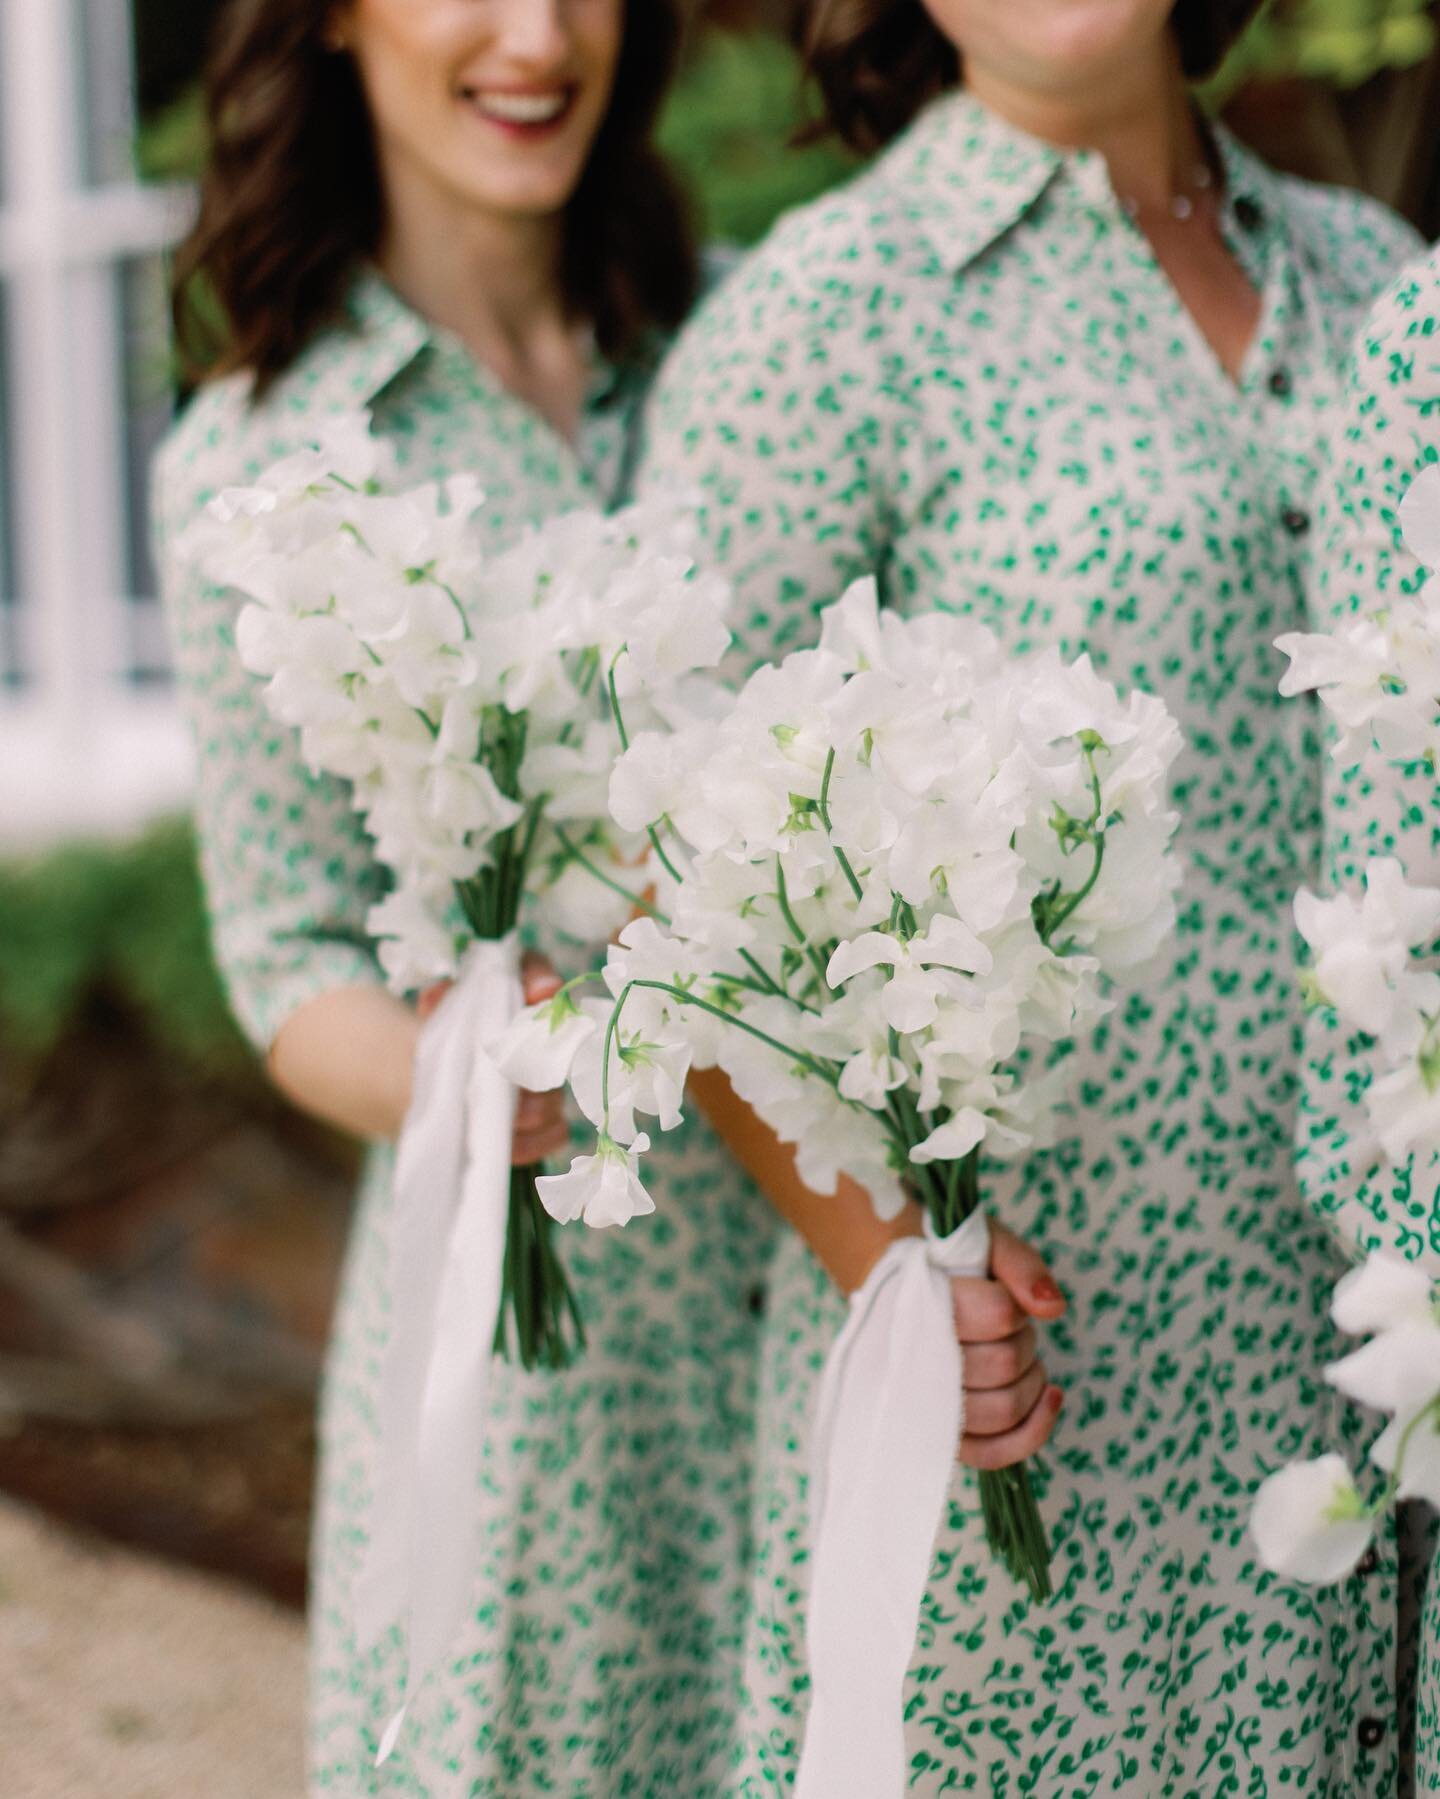 I&rsquo;m all for a patterned bridesmaid dress and a bouquet of just sweetpeas. Simple but oh so effective. 

Photographer: @imogenxiana 
Dresses: @ganni 
Florals: @mallowandmossflowers 
Silk ribbons: @little_acorn_silks 

#weddingflowers #bridalflow